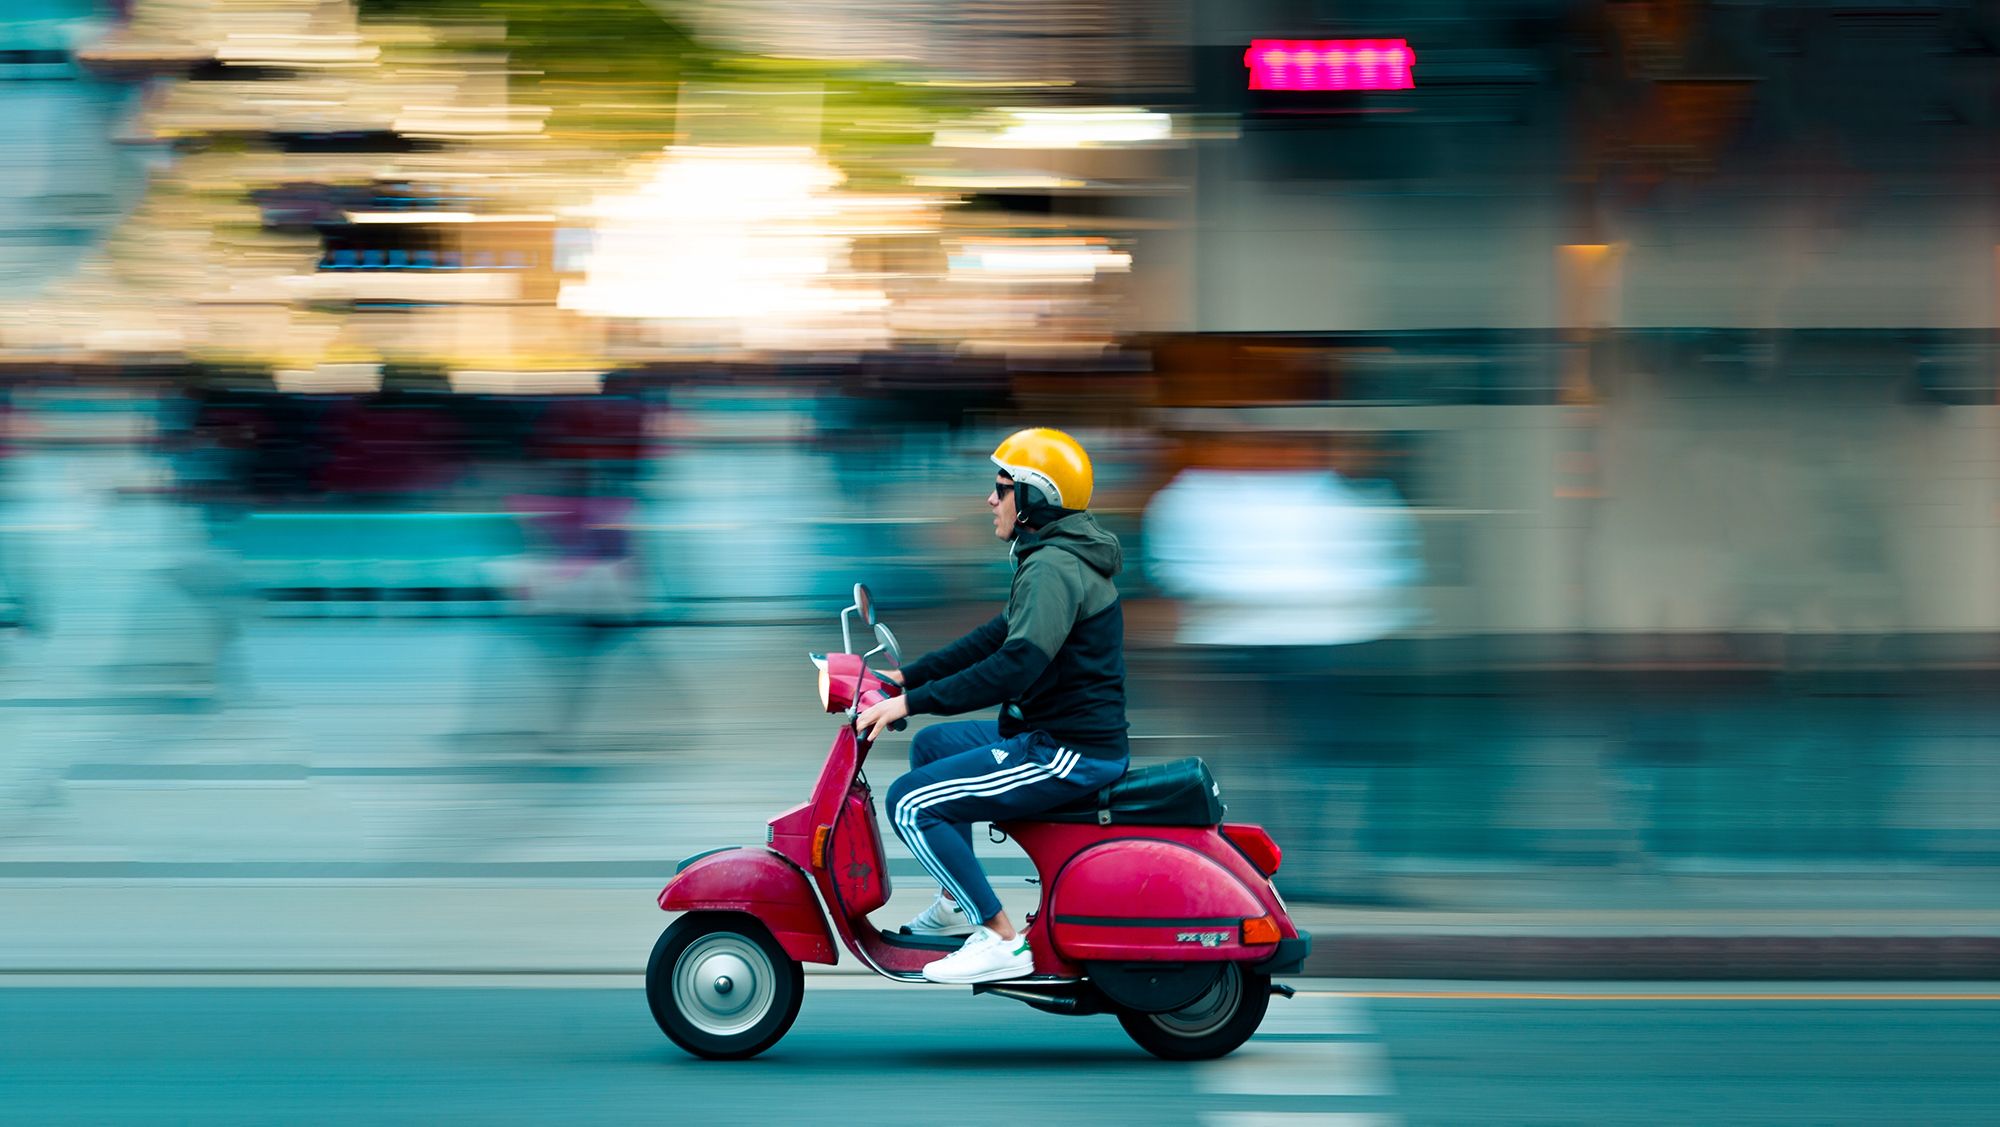 Example of Panning for Motion Blur